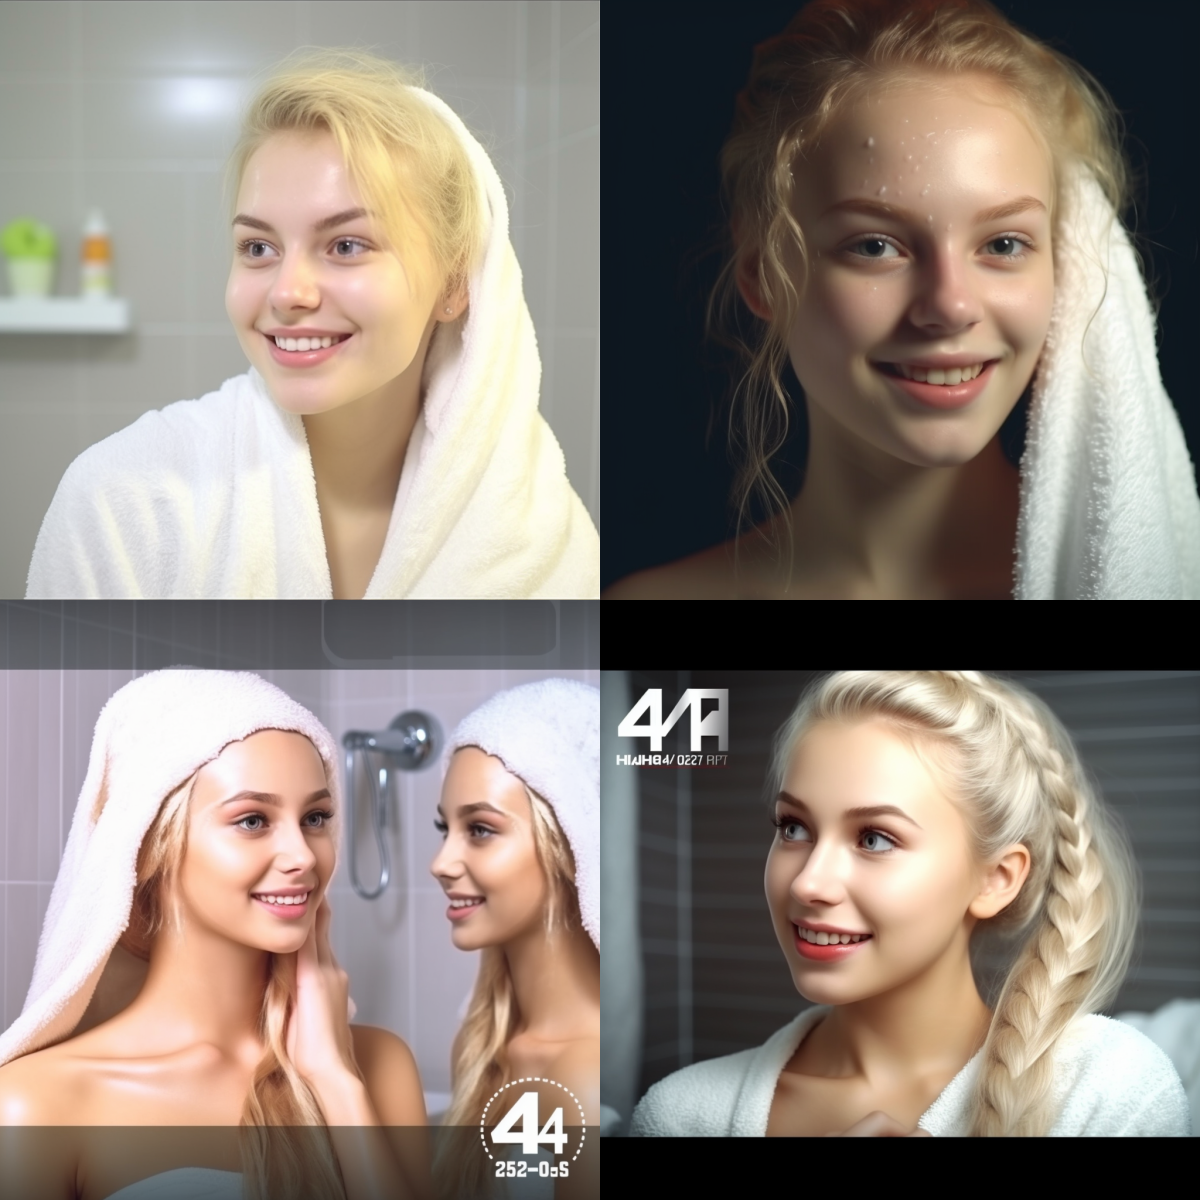 Senwater_after_shower_a_20_years_old_beautiful_blonde_girl_in_s_95f3a8f7-4563-4193-ab9c-1634e1afe3d8